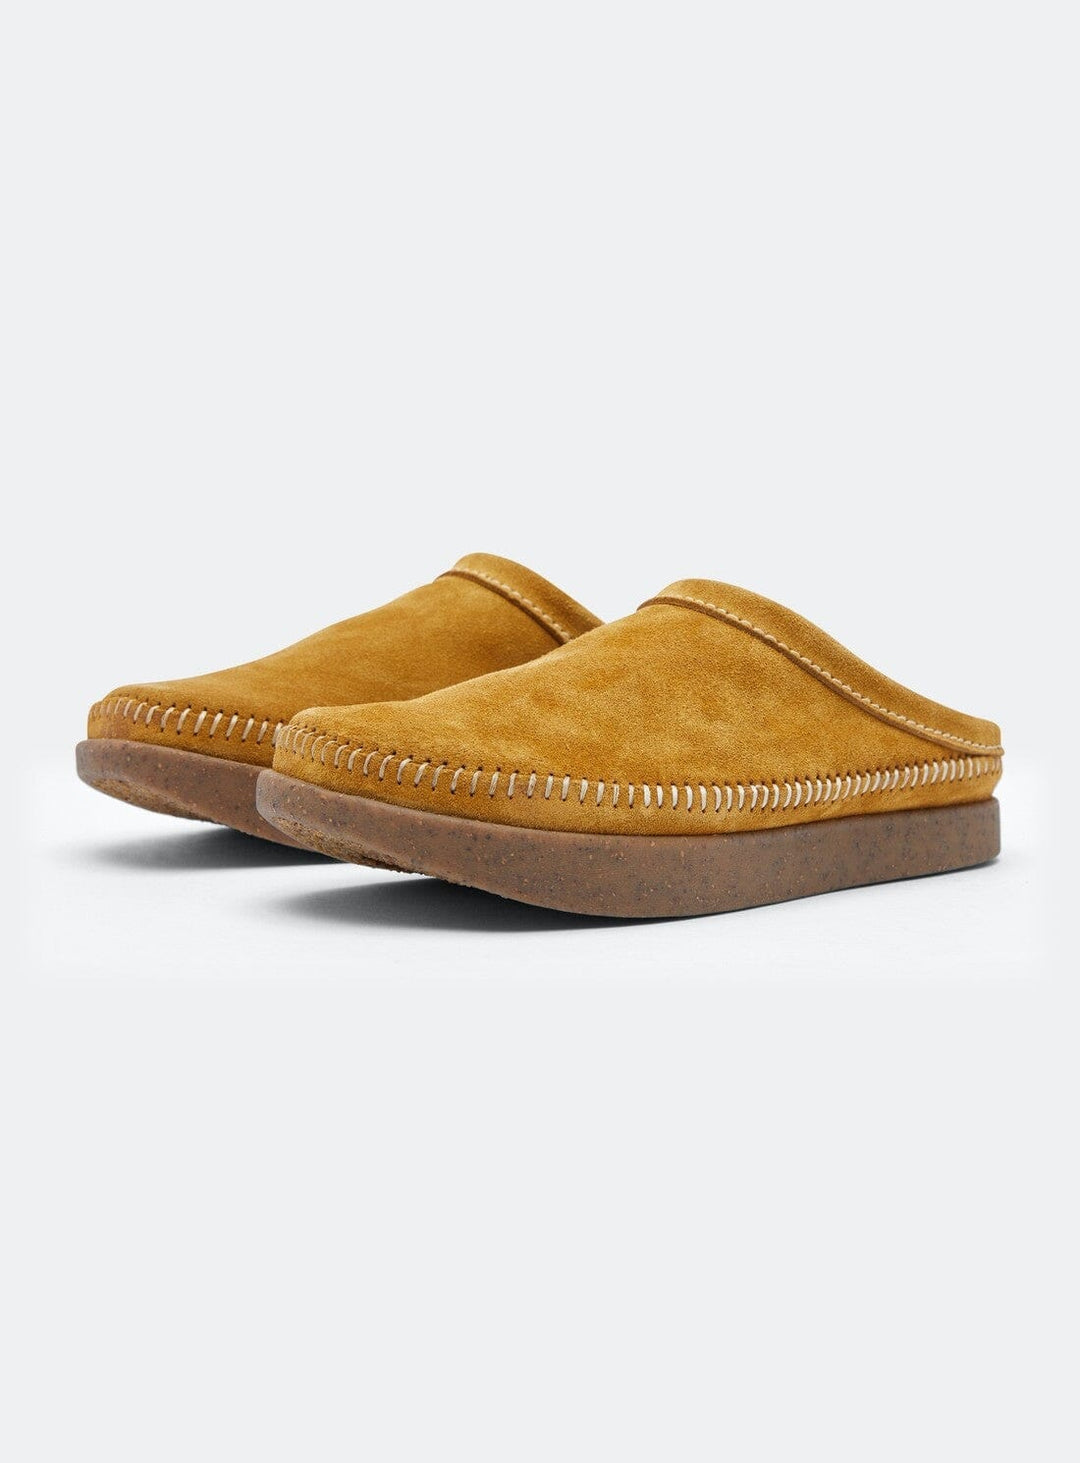 Floyd Heritage Mule in Butterscotch Suede Shoes YBDFinds 